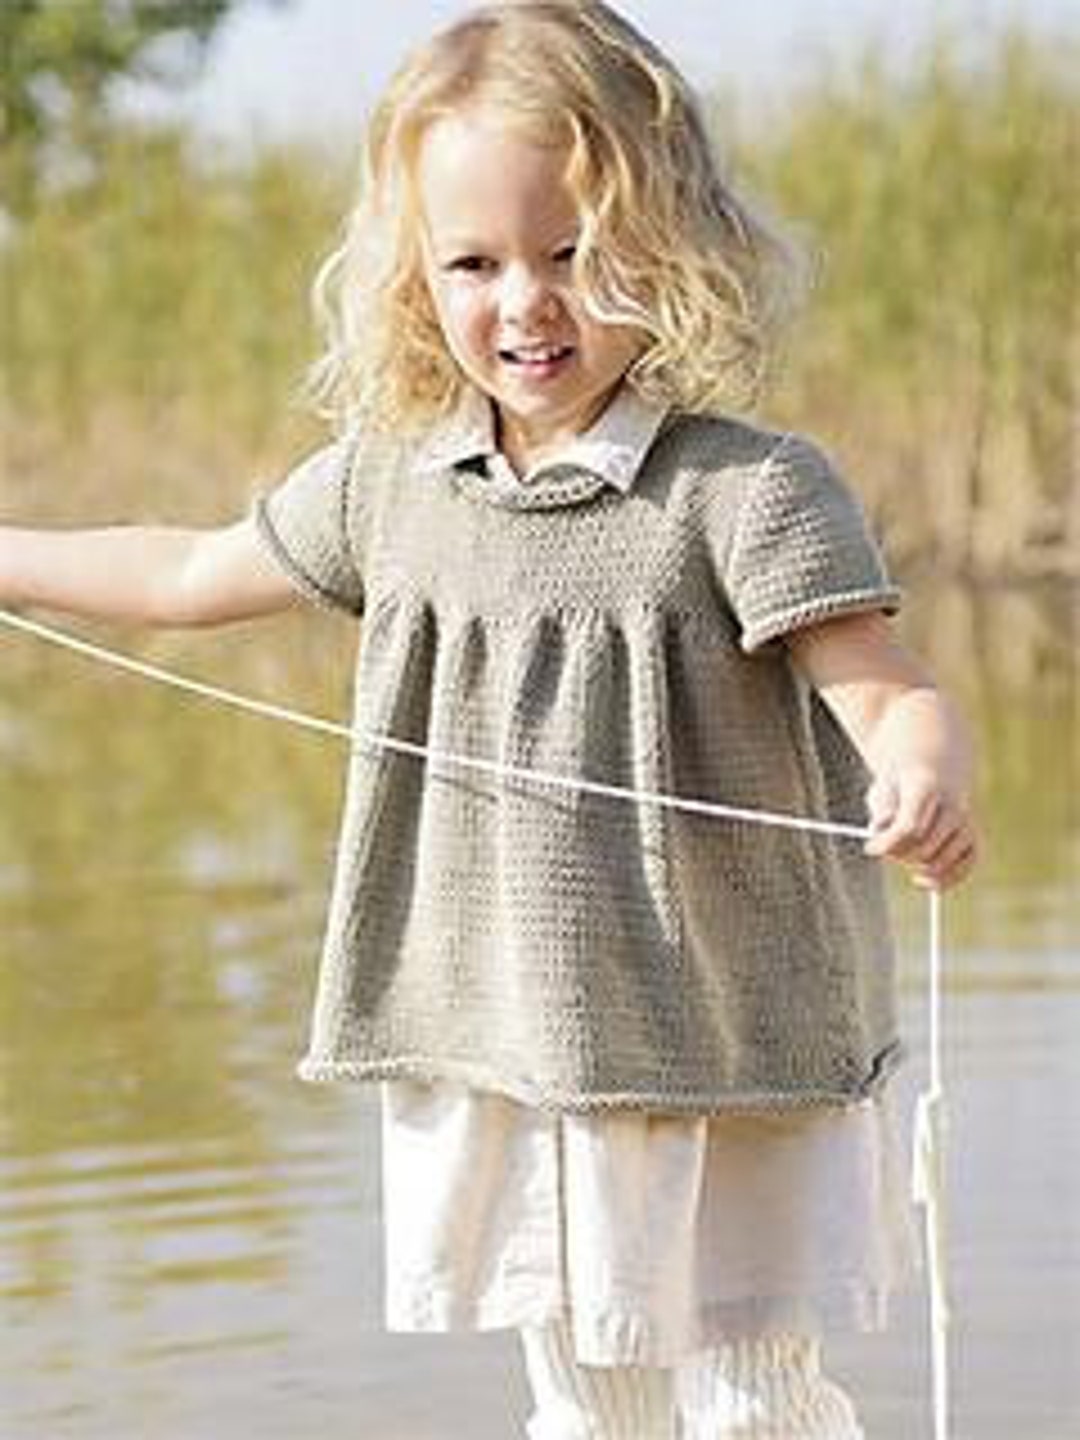 Beatrice Knitted Child's Top Digital Pattern - Etsy